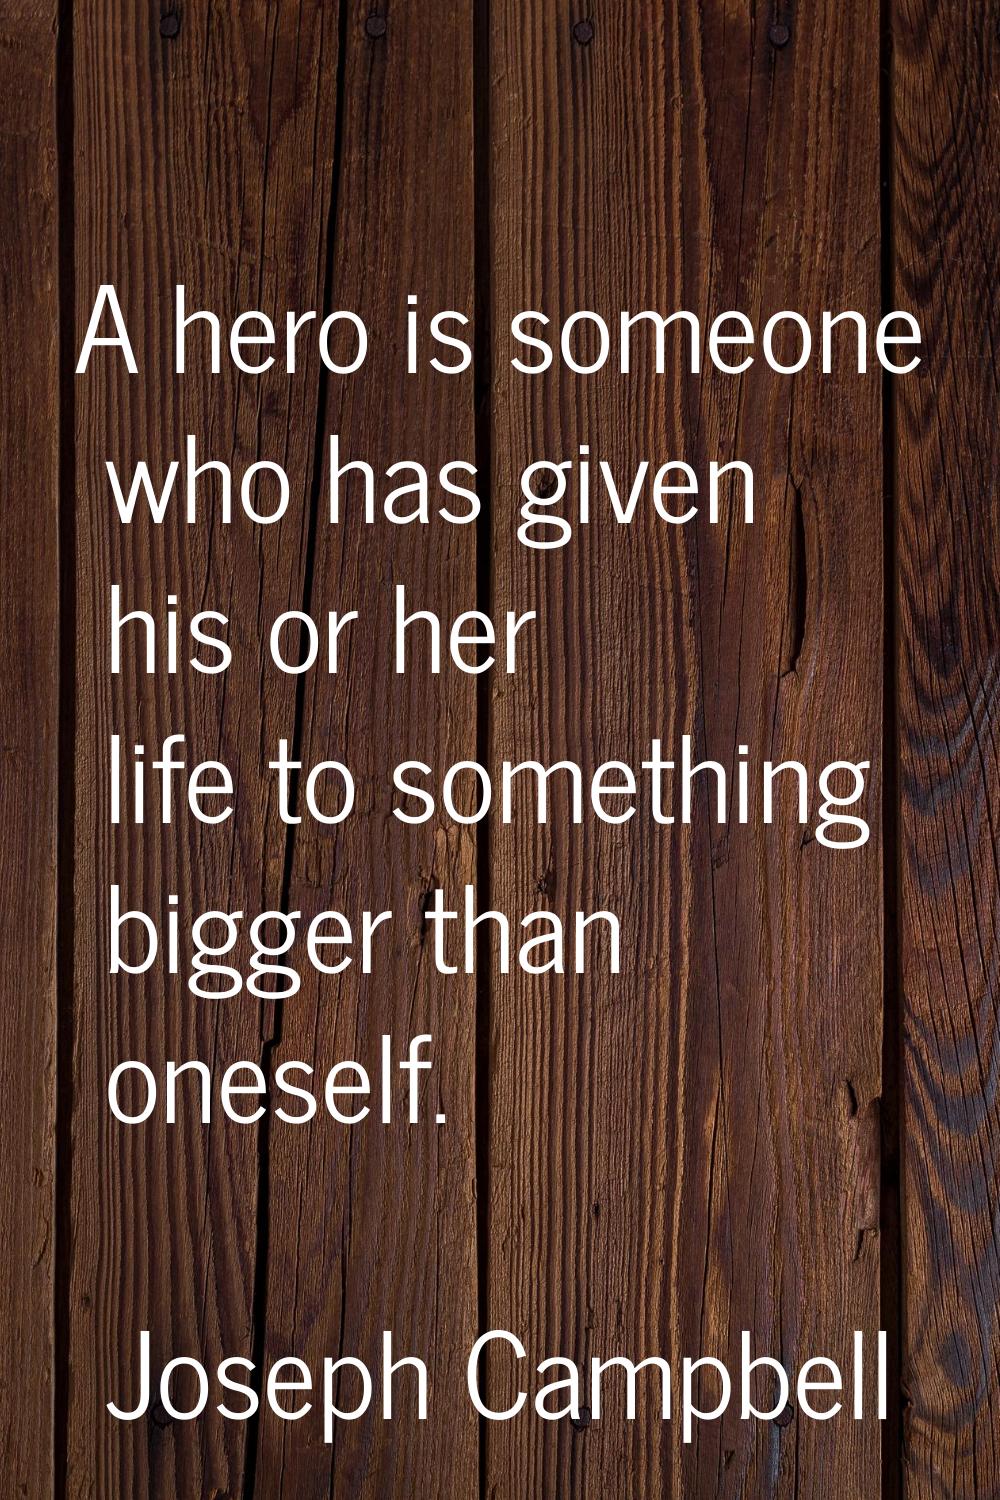 A hero is someone who has given his or her life to something bigger than oneself.